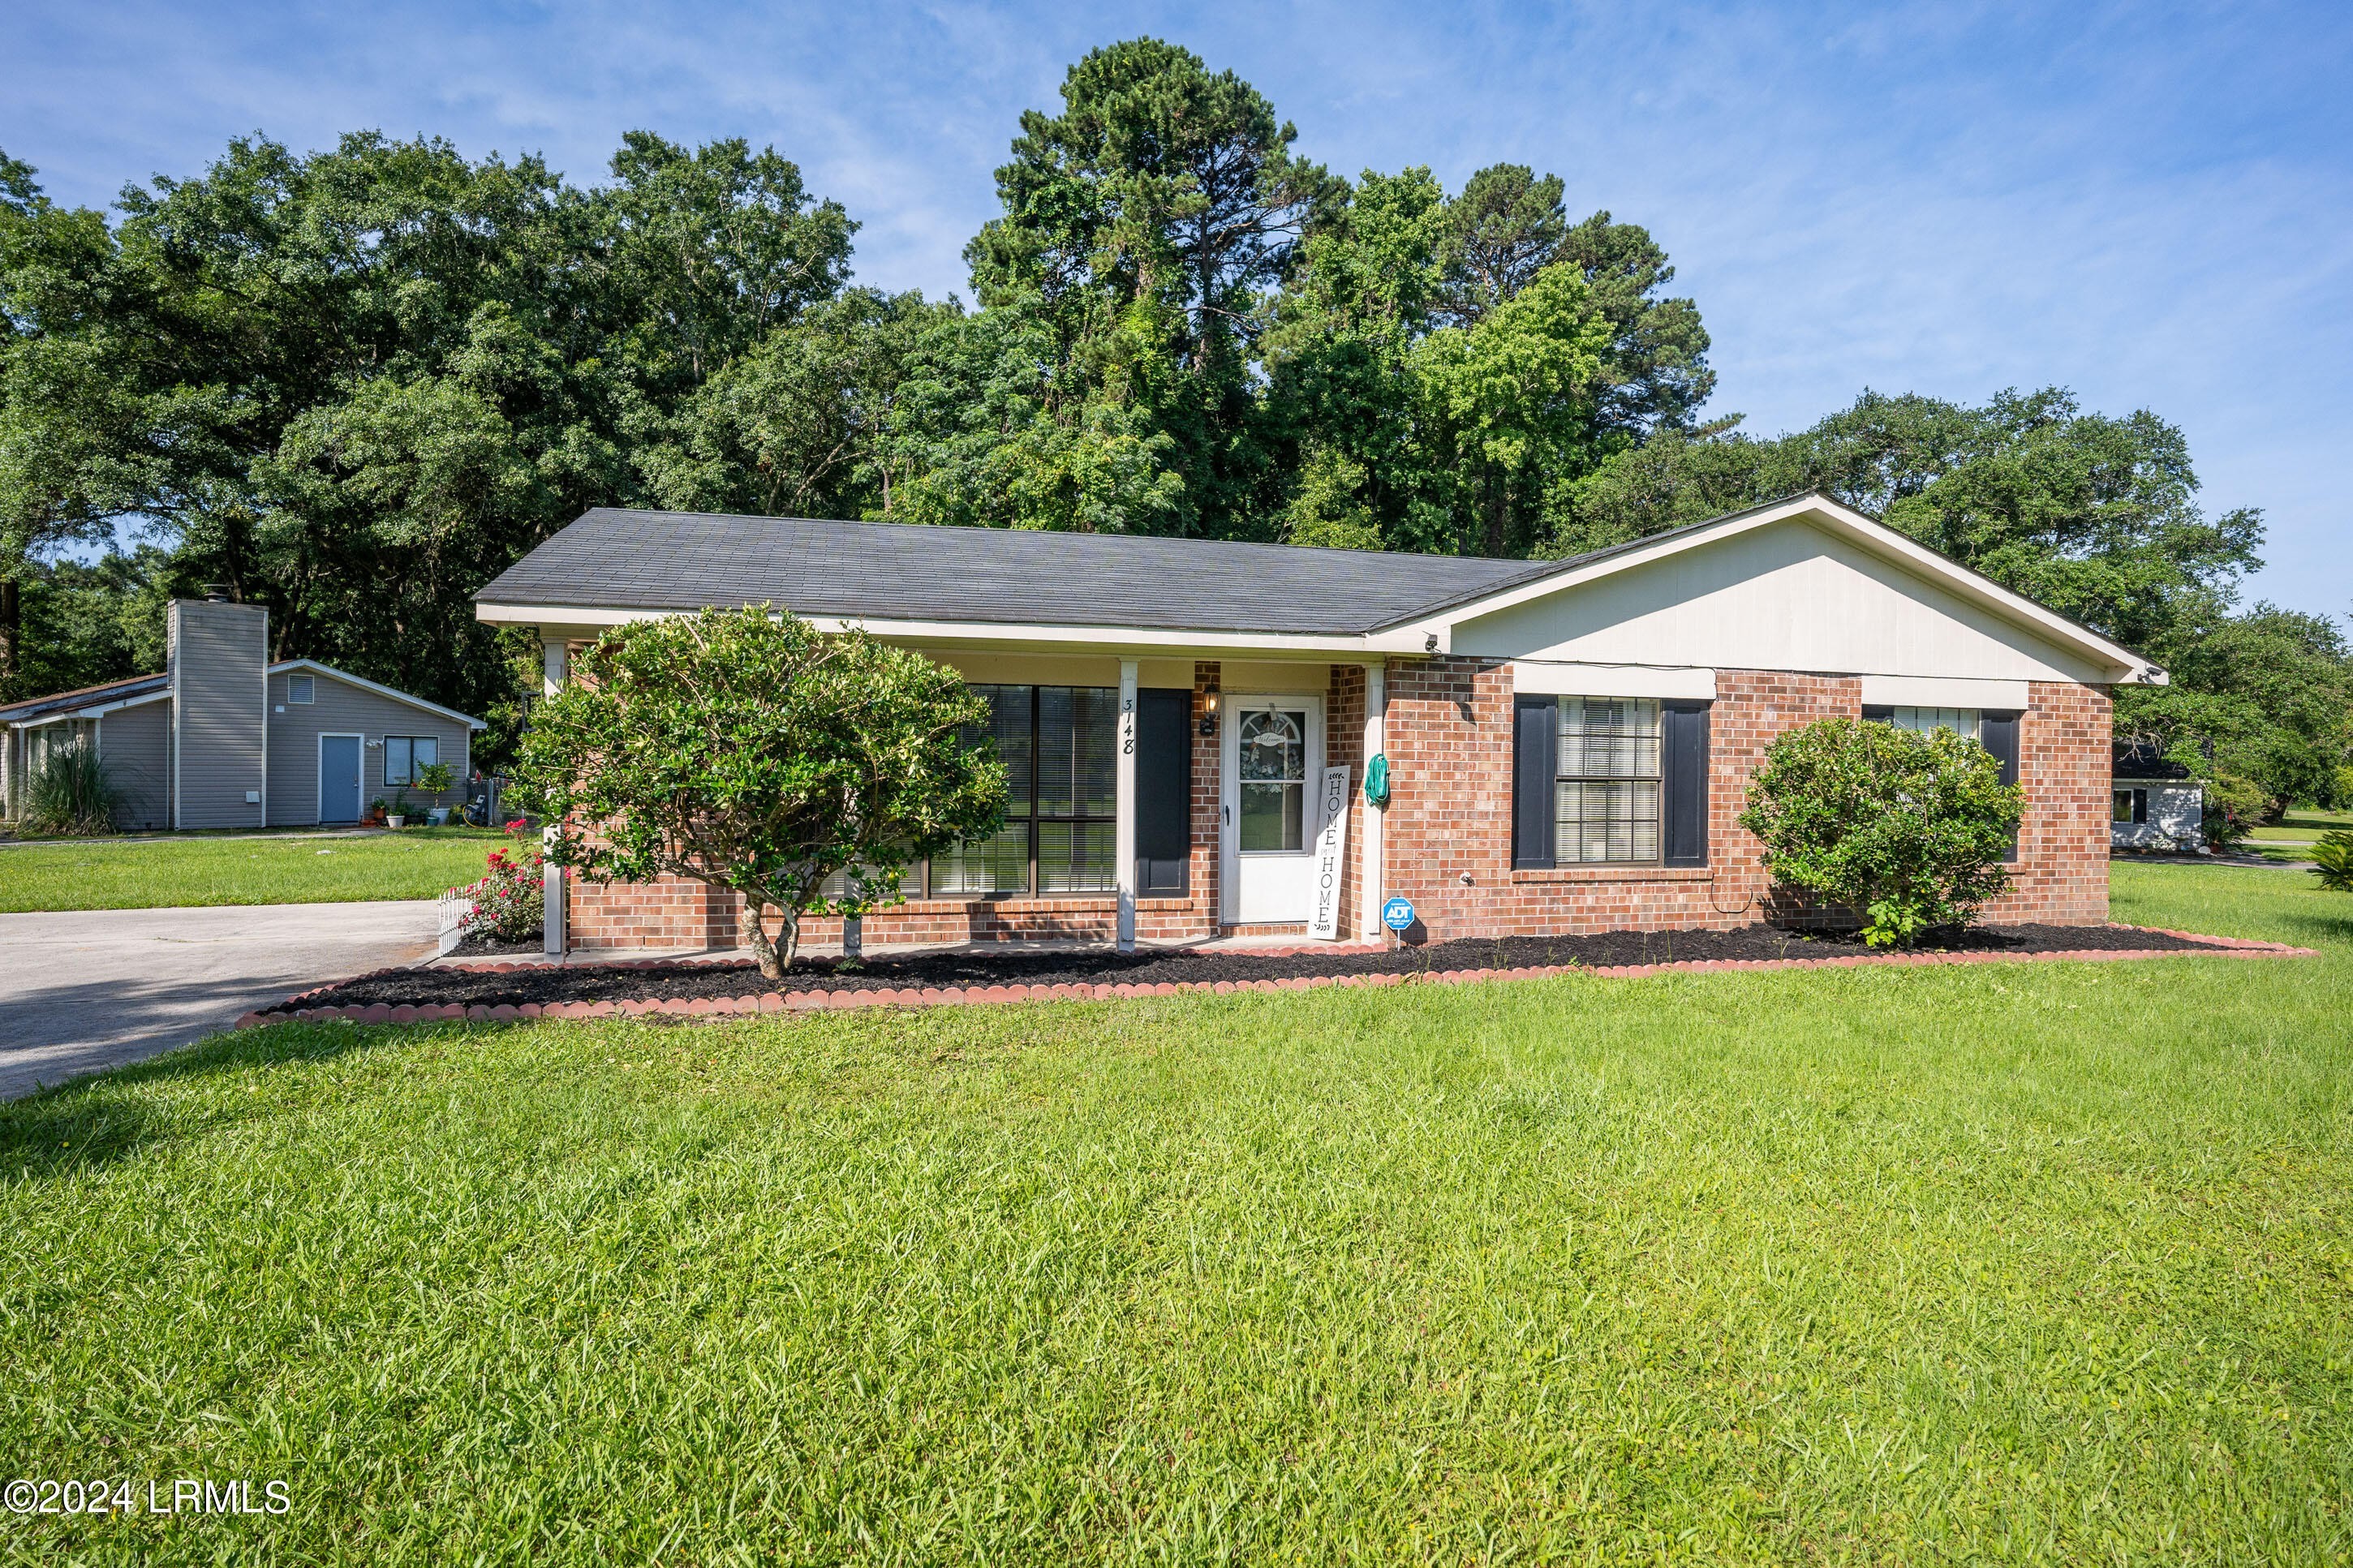 1. 3148 Clydesdale Circle